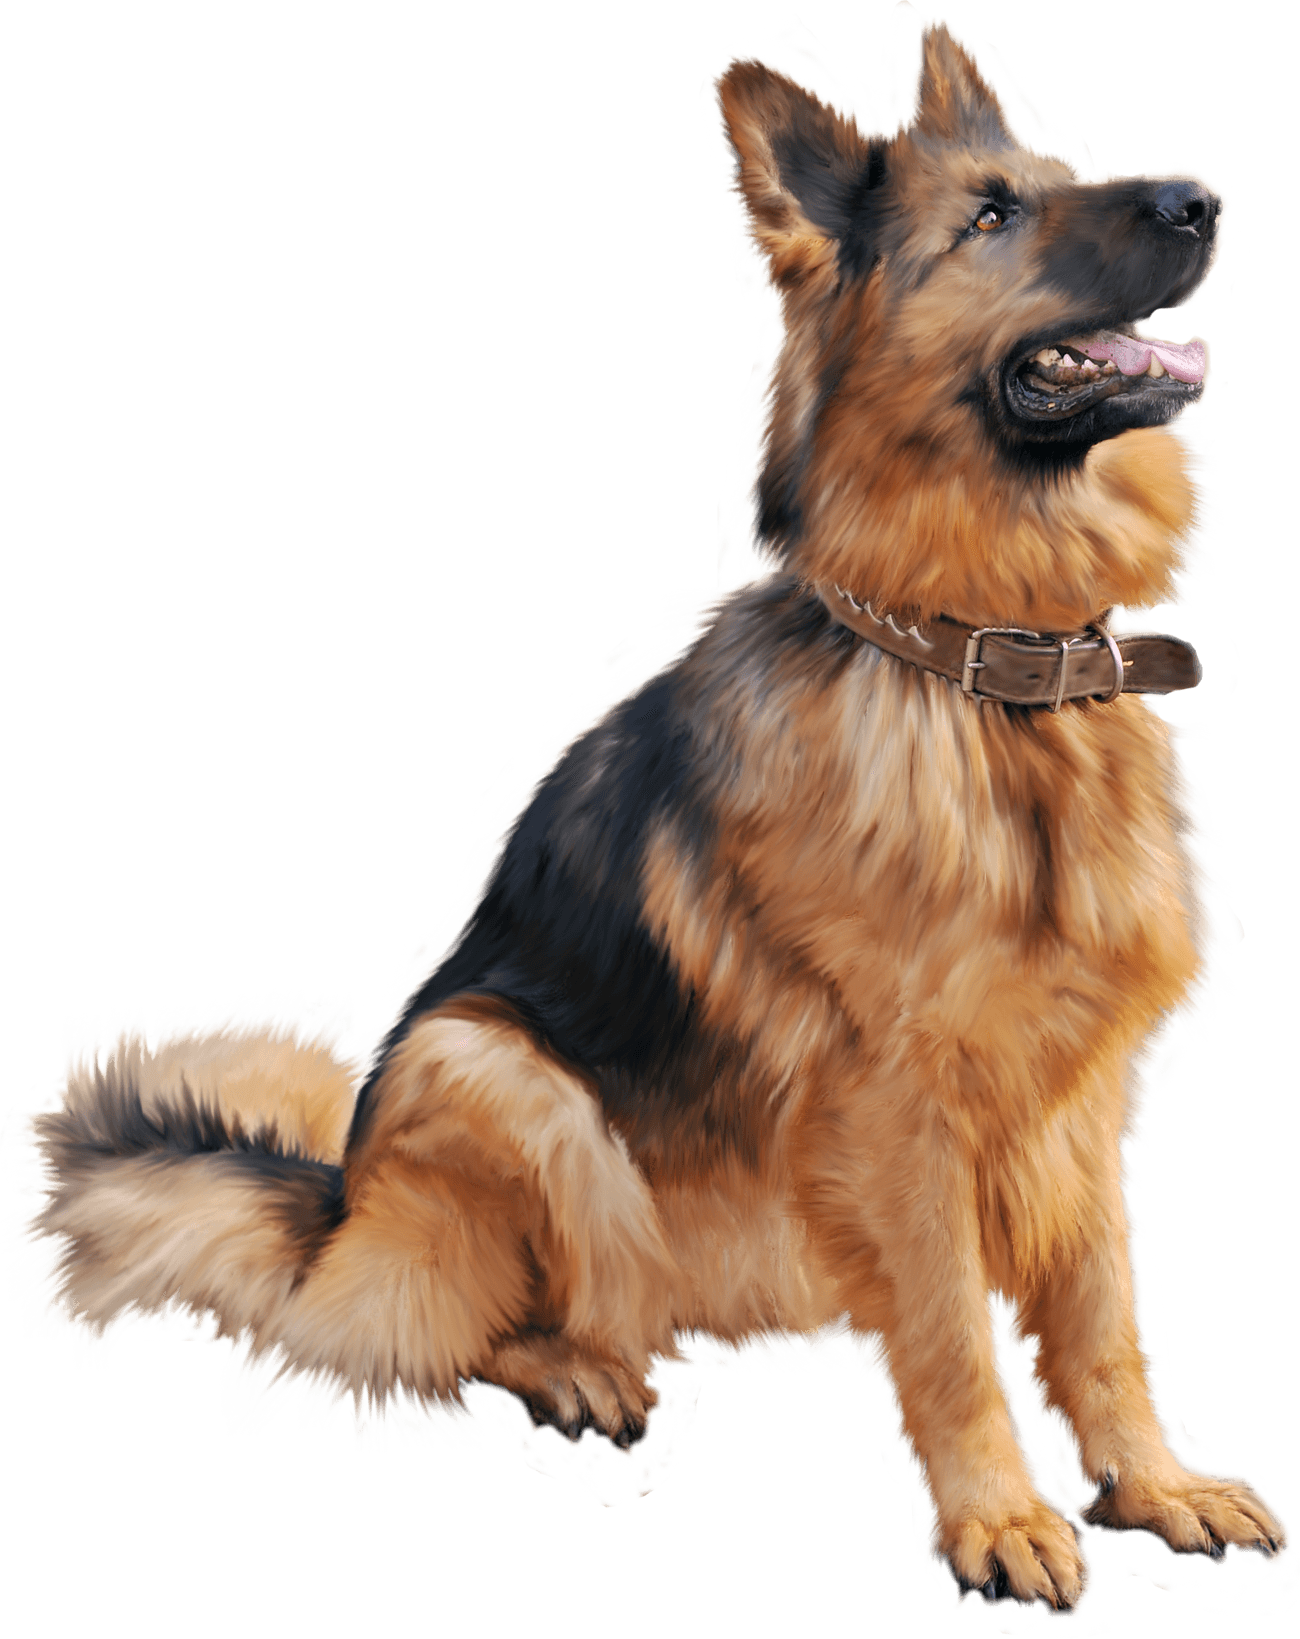 Download Dog Png Image Picture Download Dogs HQ PNG Image | FreePNGImg